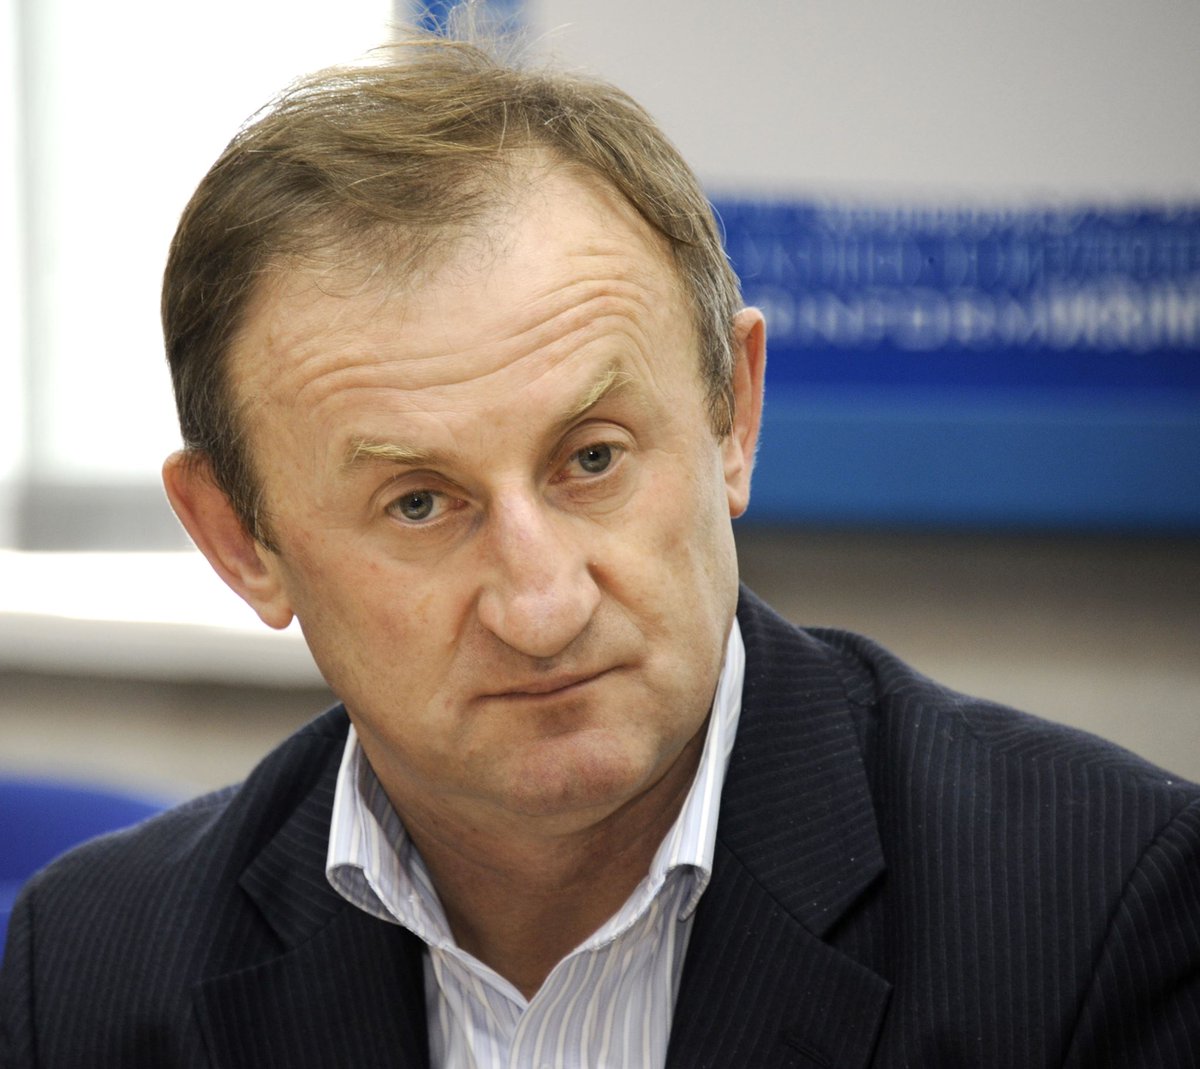  #Thread Meet Michael Ratushnyy, head of the Ukrainian World Coordinating Council (UWCC). As you can imagine, with such a title, he gets around. Ratushnyy was first elected to the position in 2011 by the 5th World Forum of Ukrainians & re-elected in 2016. Buckle up, as they say...